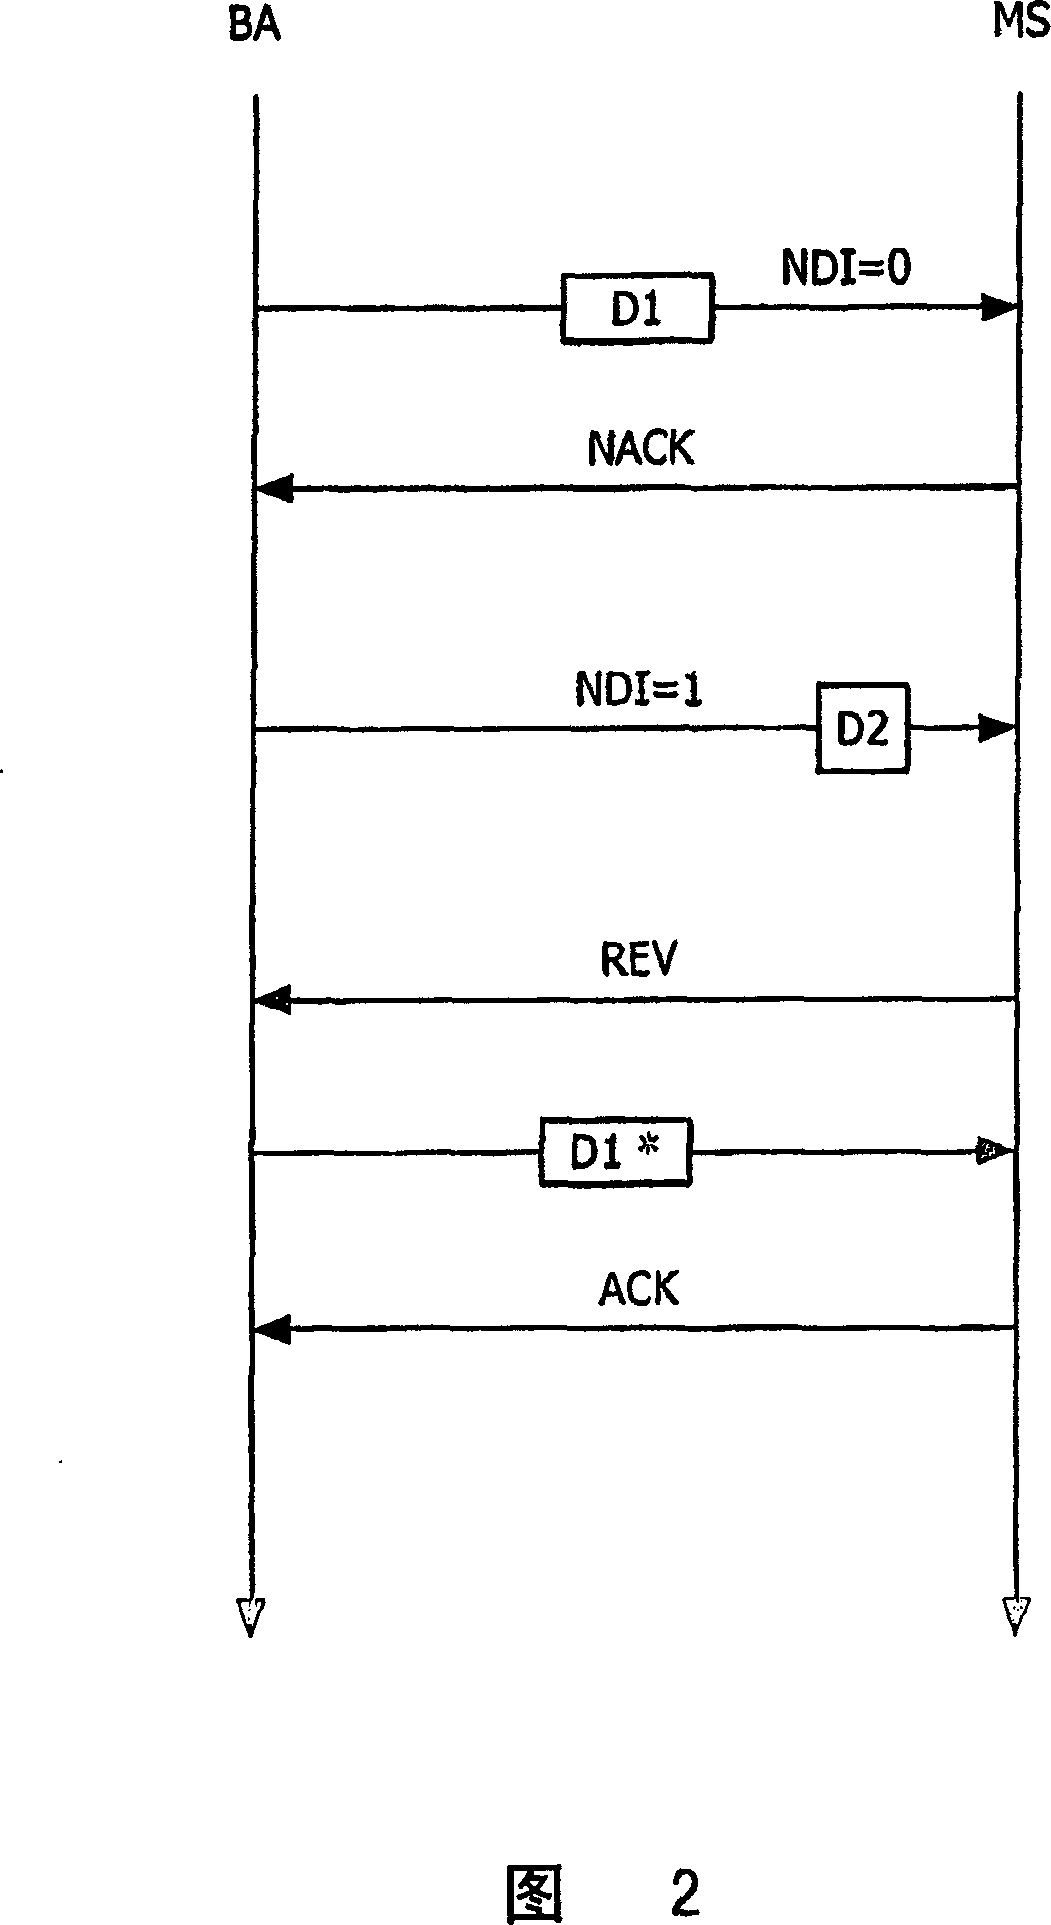 Transmission of data packets from a transmitter to a receiver